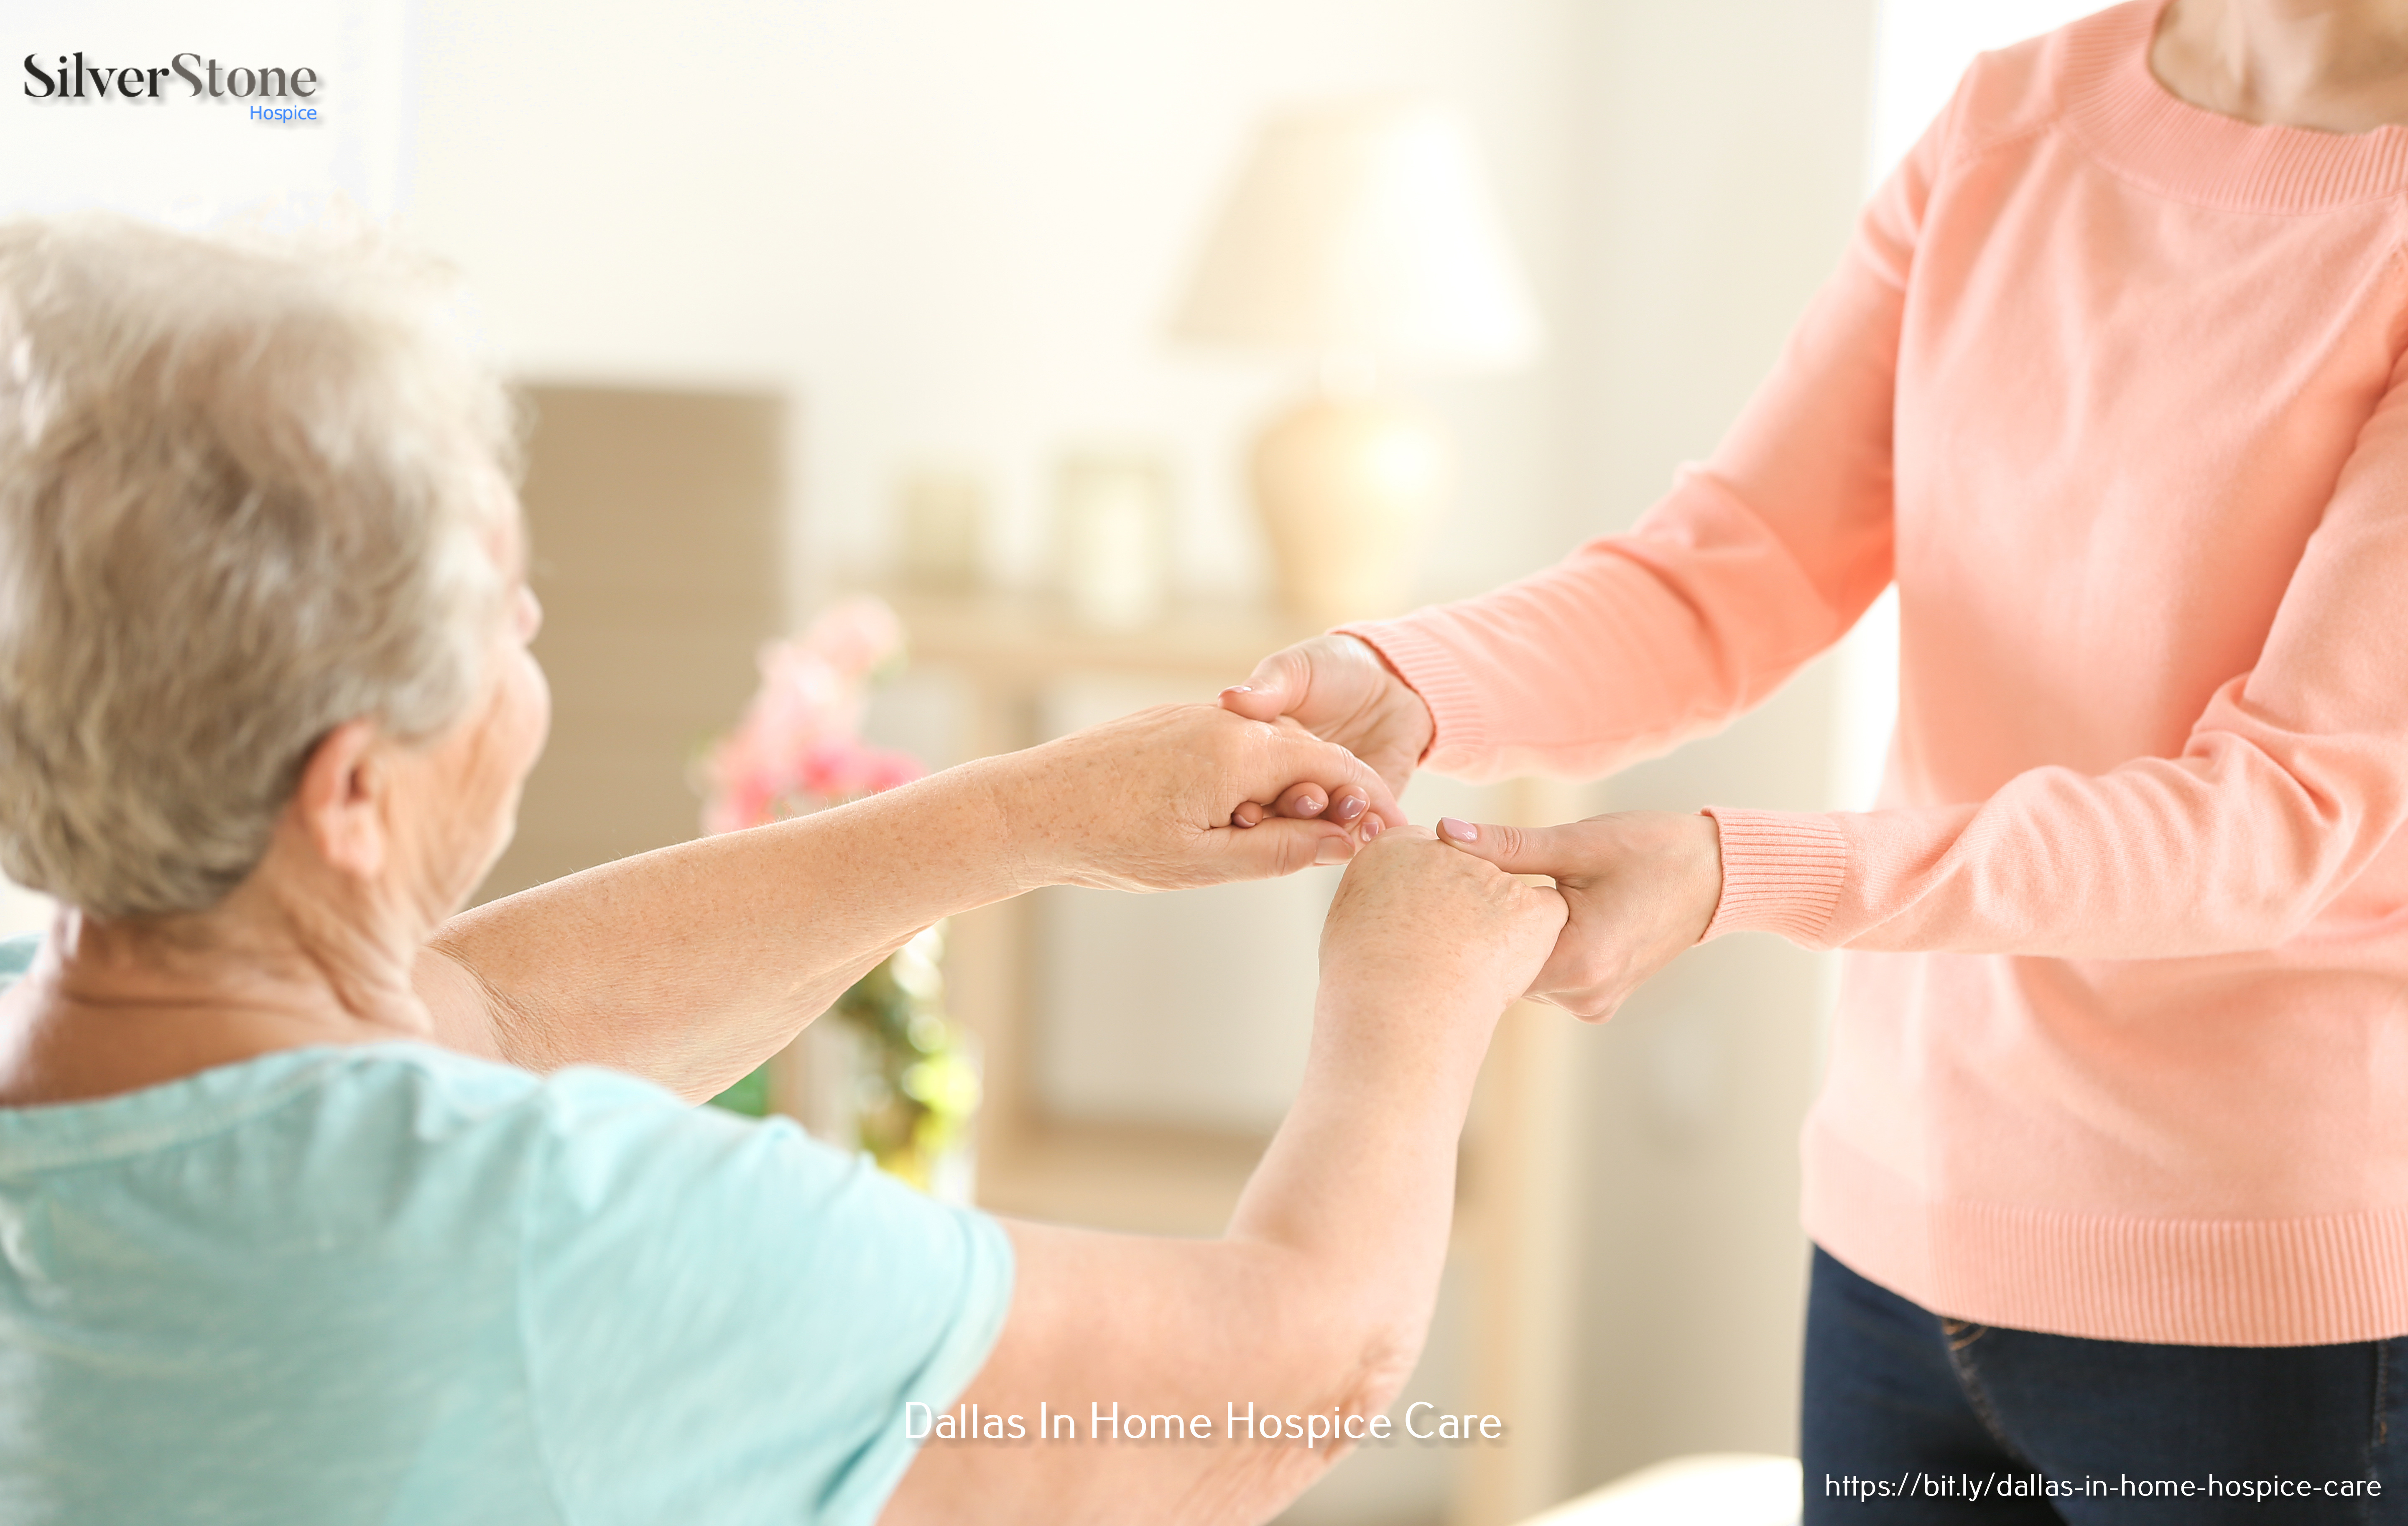 SilverStone Hospice Highlights What Makes Them the Best Hospice Care Provider